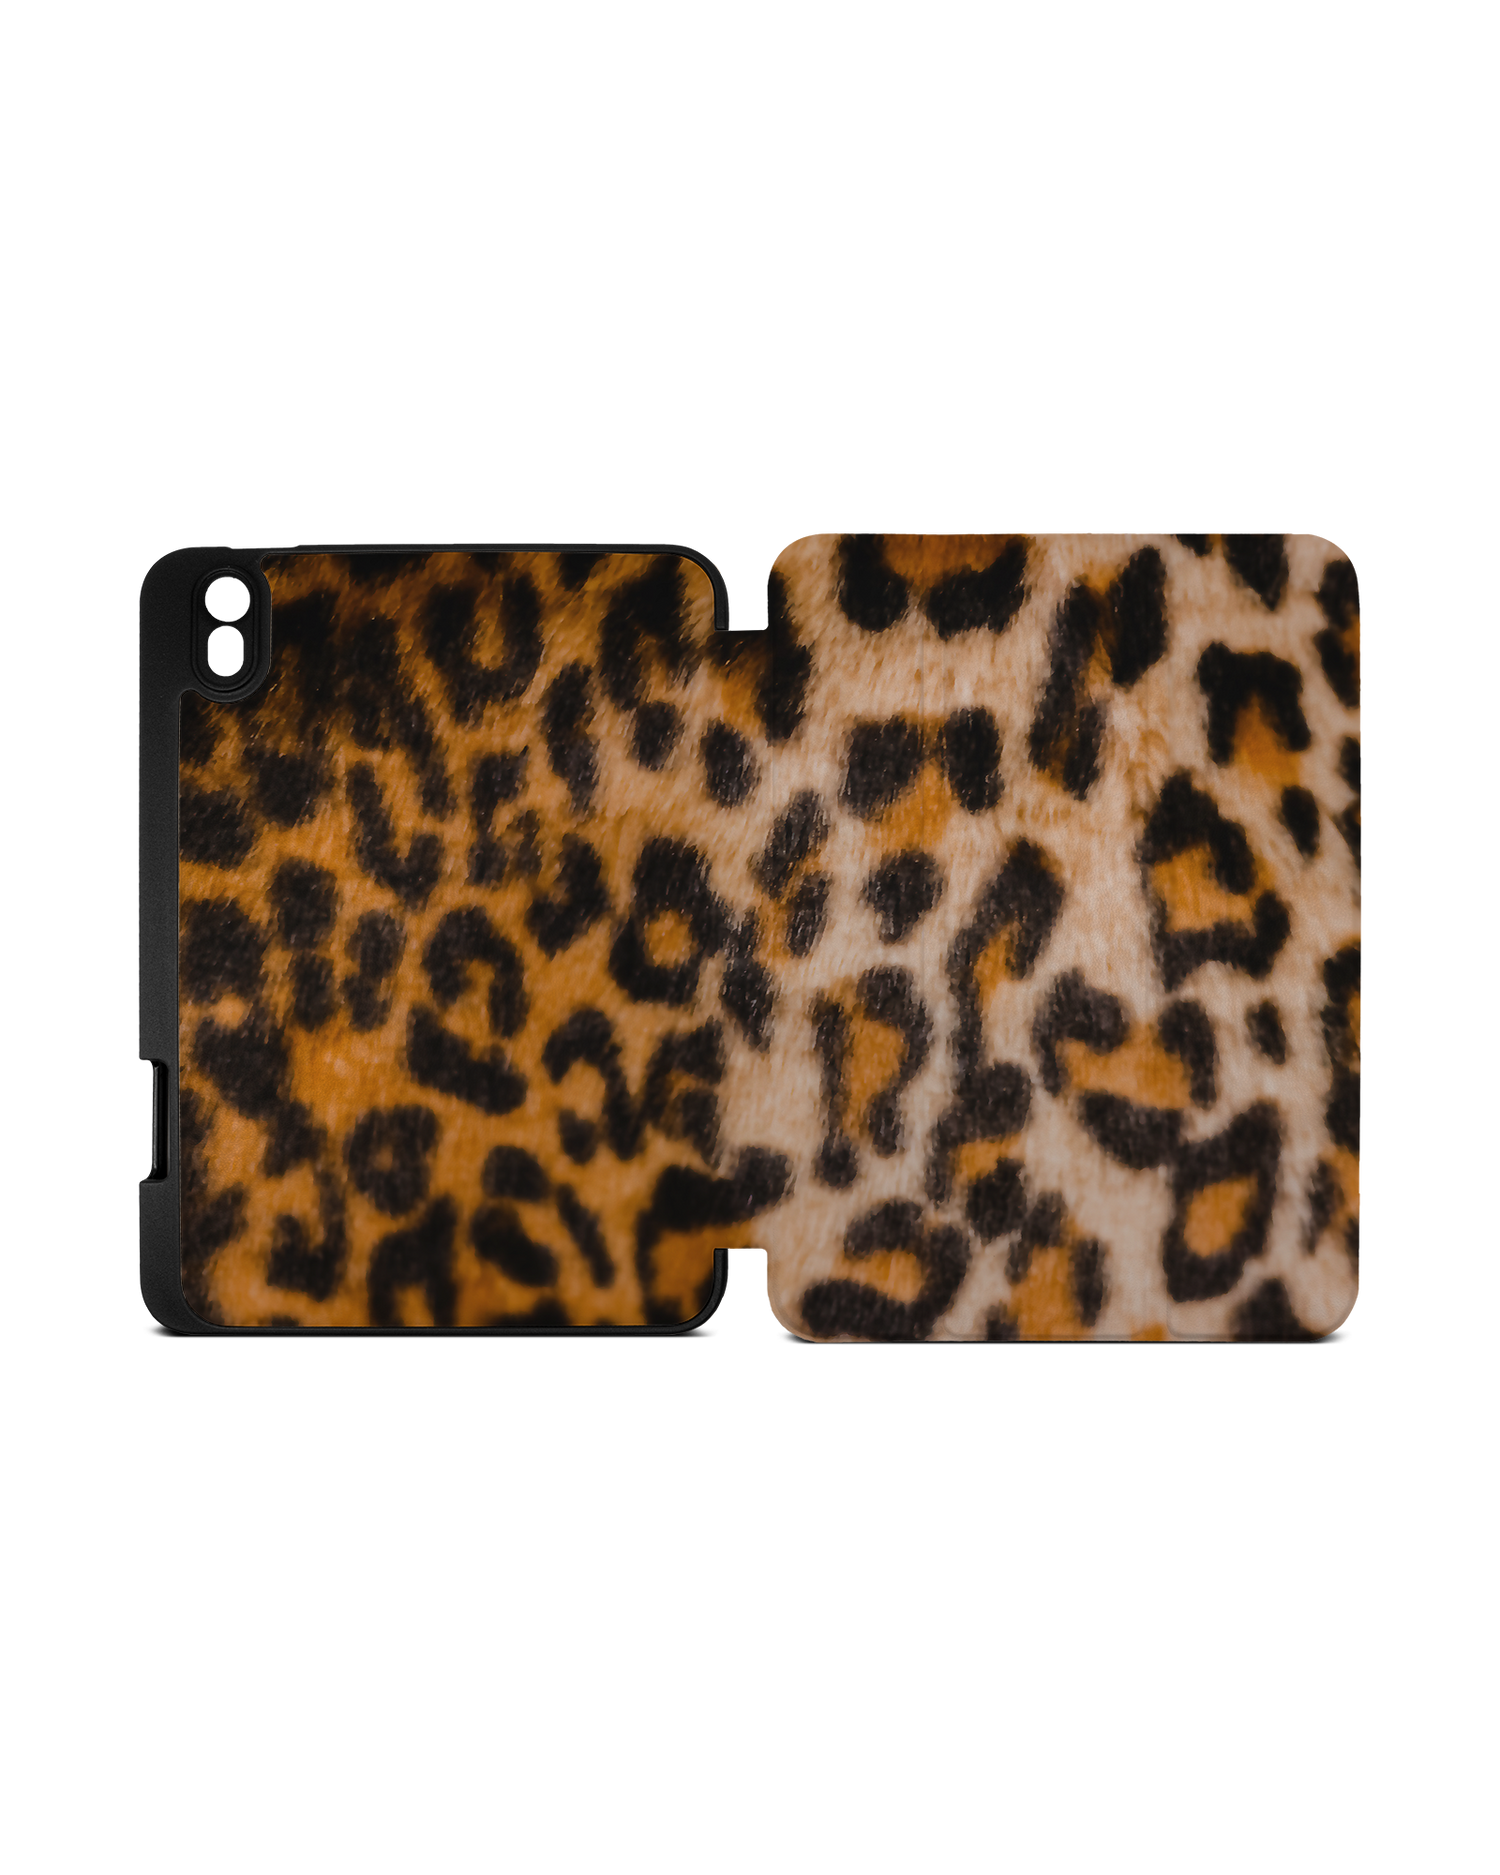 Leopard Pattern iPad Case with Pencil Holder Apple iPad mini 6 (2021): Opened exterior view